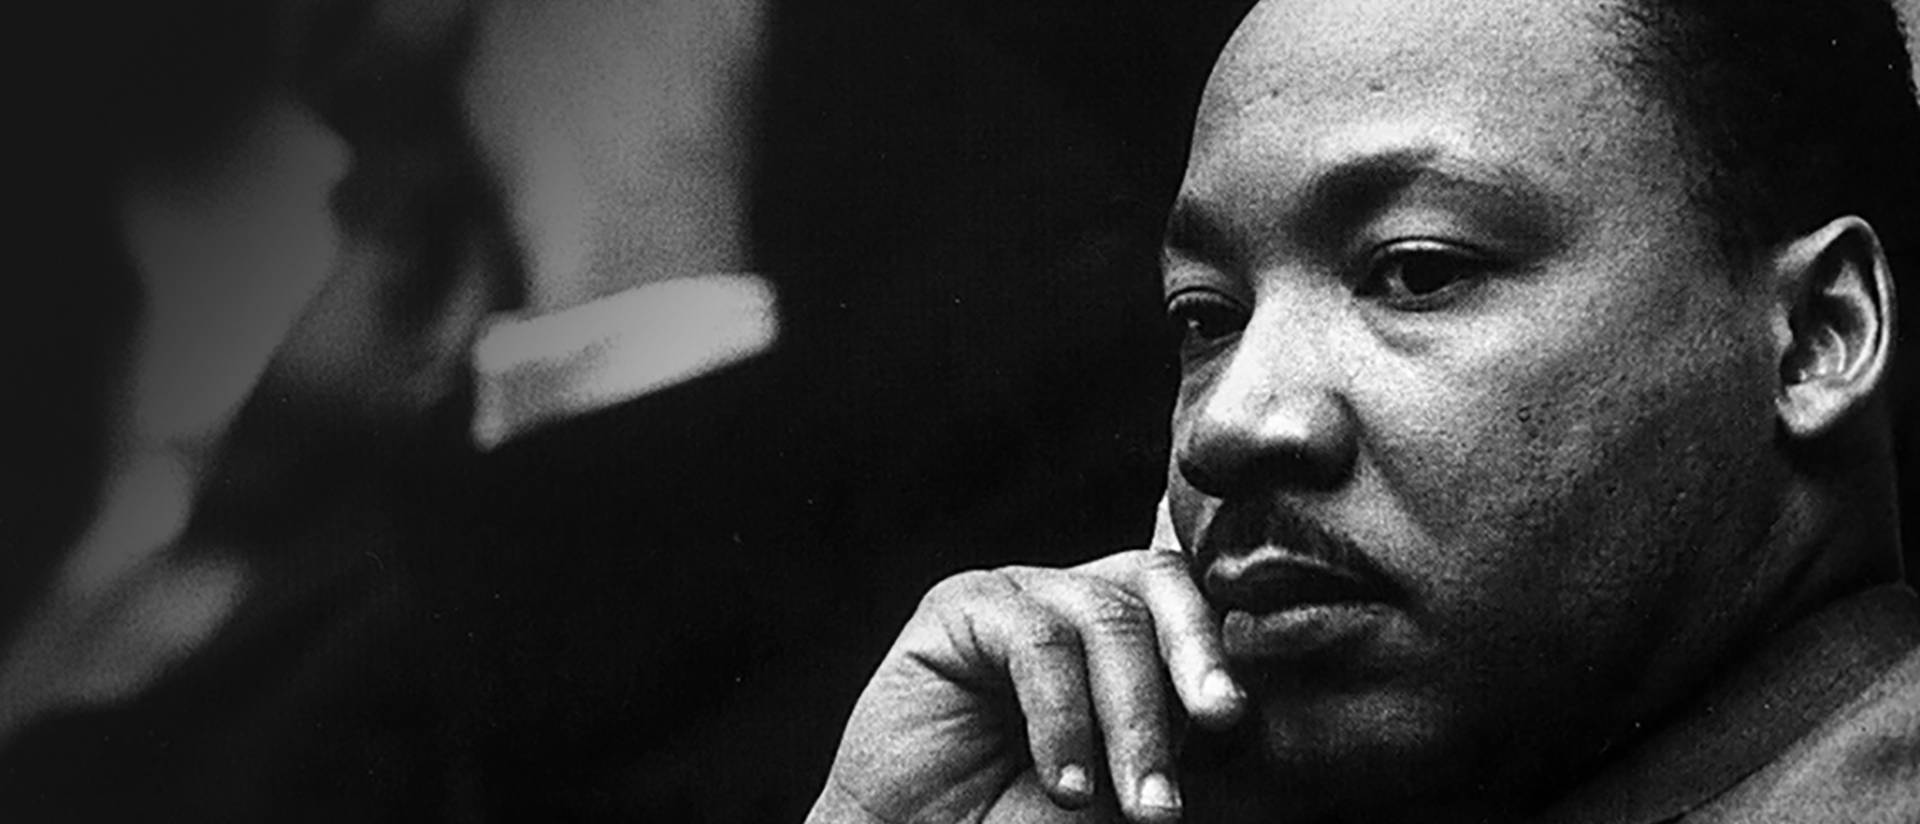 UW-Eau Claire observes Martin Luther King Jr. Day April 19 with a day of service and an evening remembrance event.